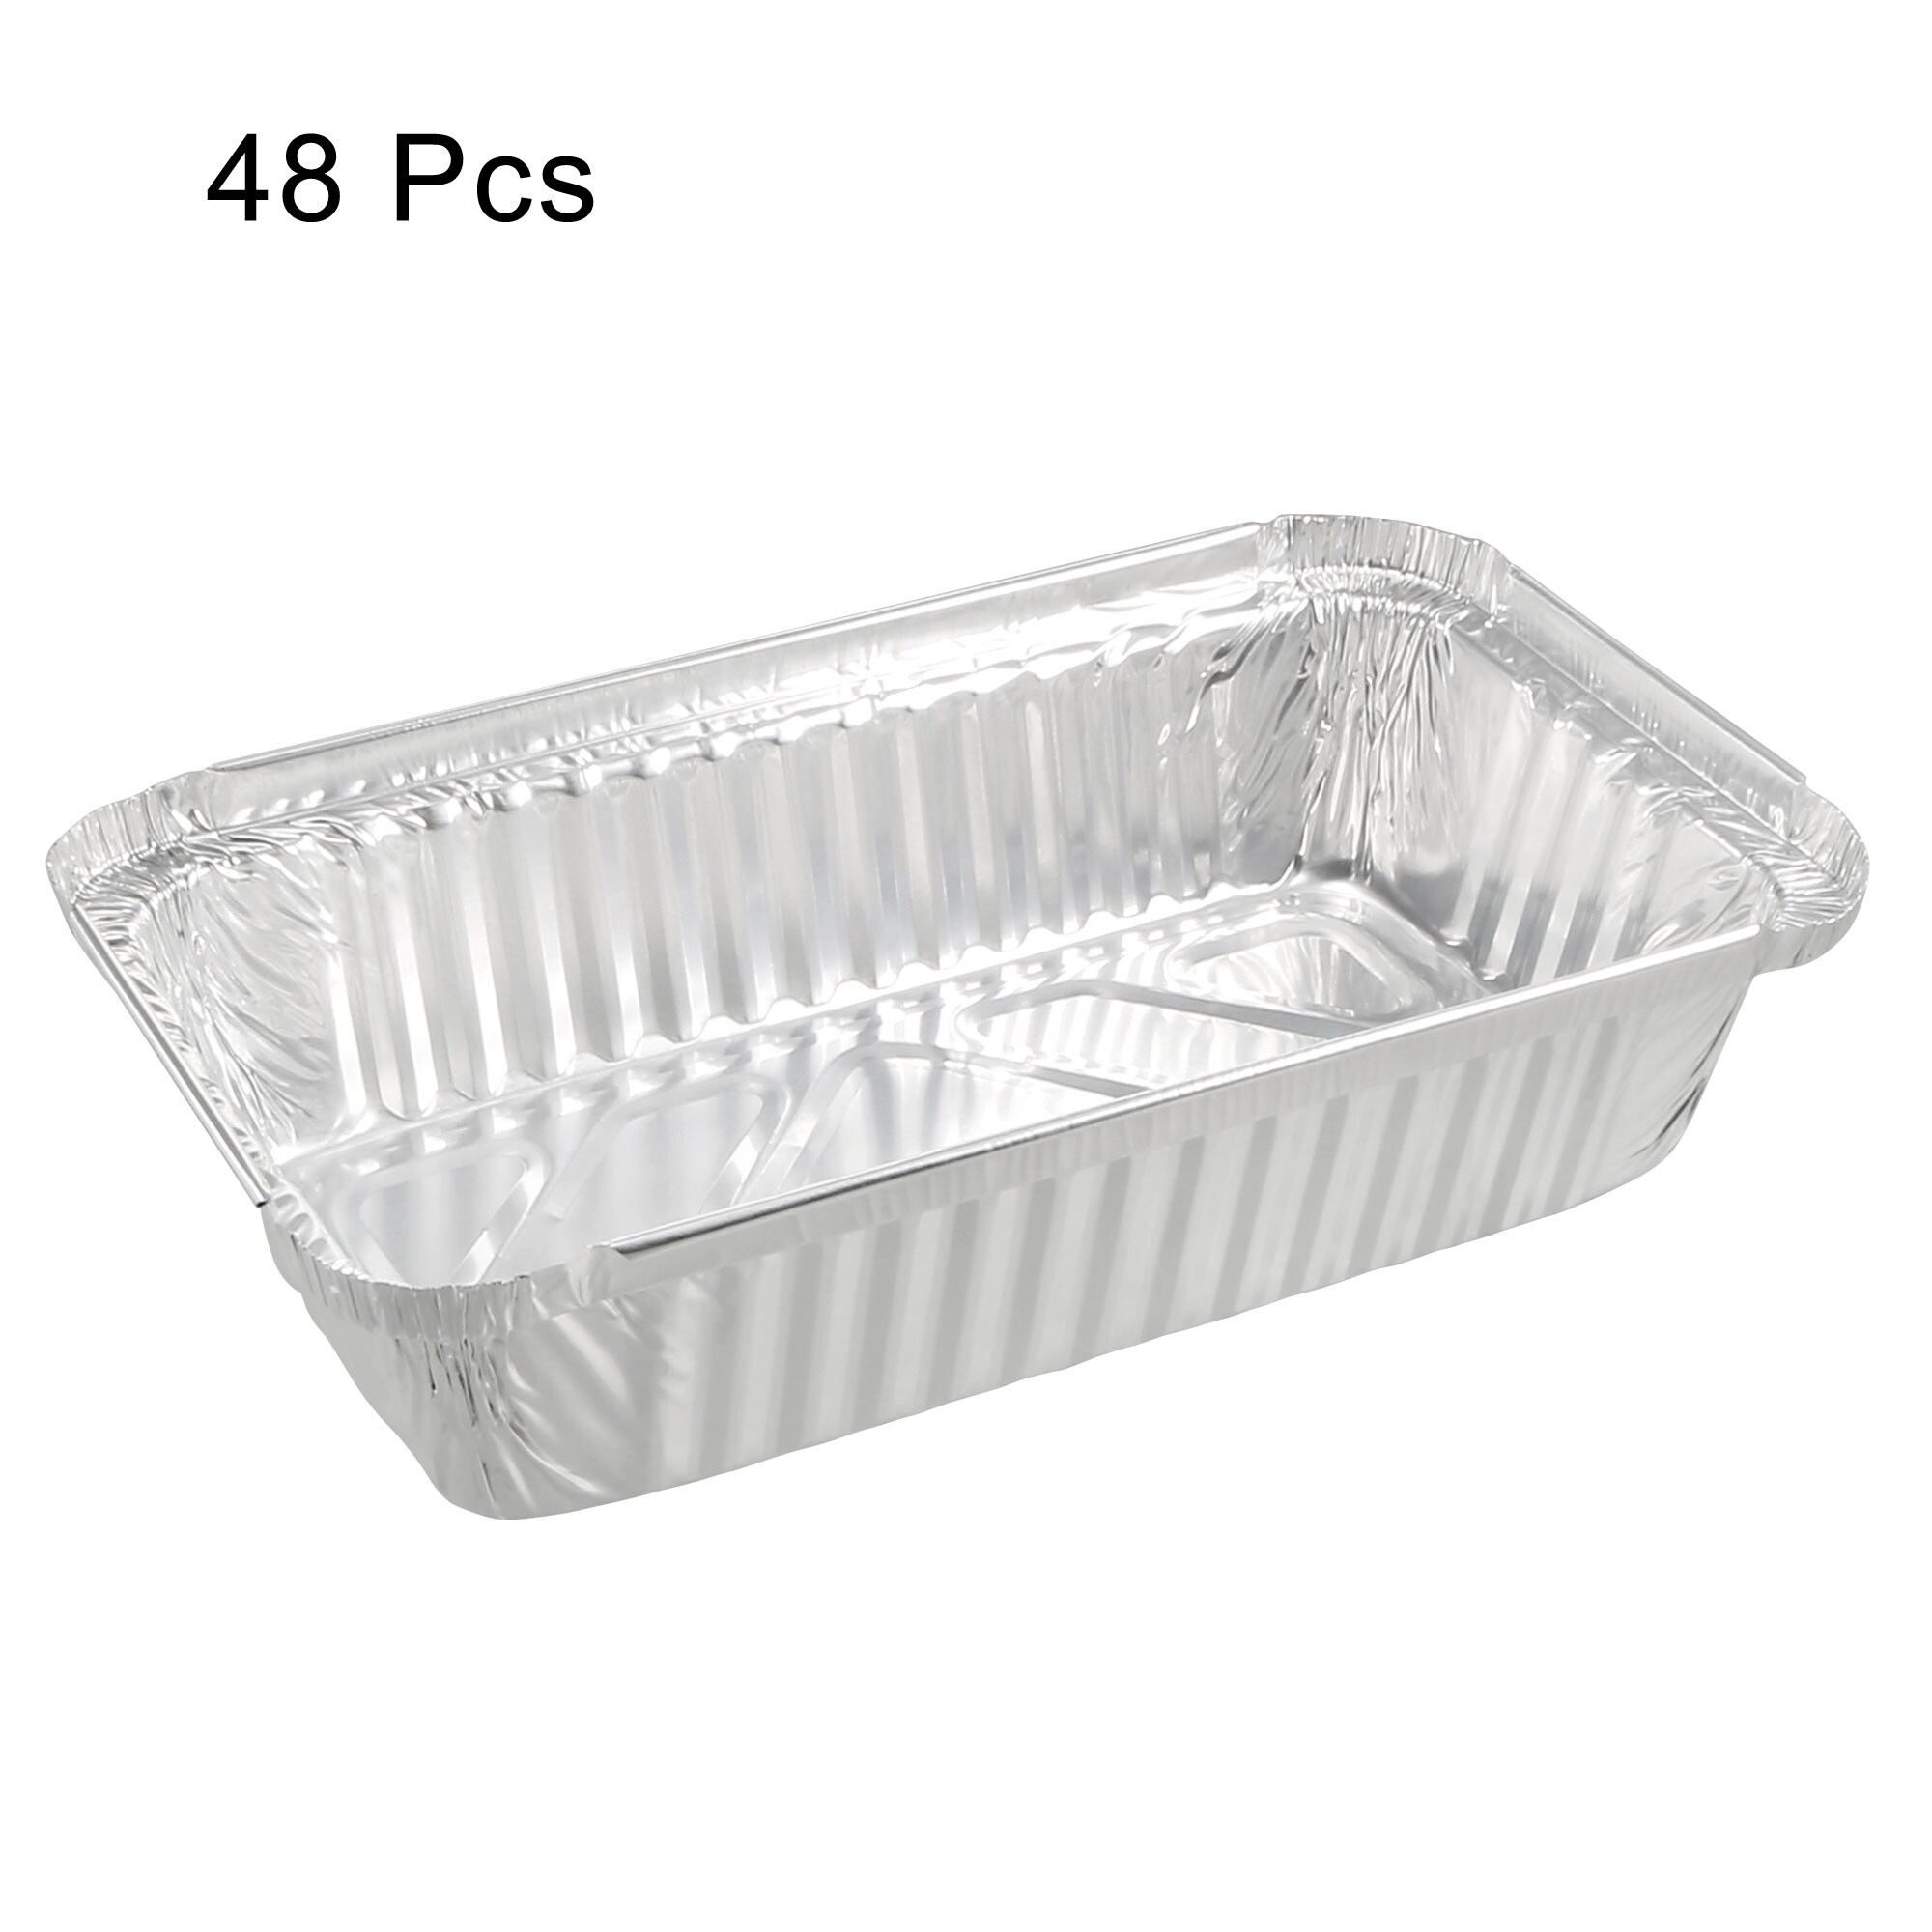 https://ak1.ostkcdn.com/images/products/is/images/direct/4e7a31e7336fe7fc847f302fc5db9cd165f25259/7.5%22x4.3%22-Aluminum-Foil-Pans%2C-Disposable-Trays-Containers-for-Cooking.jpg